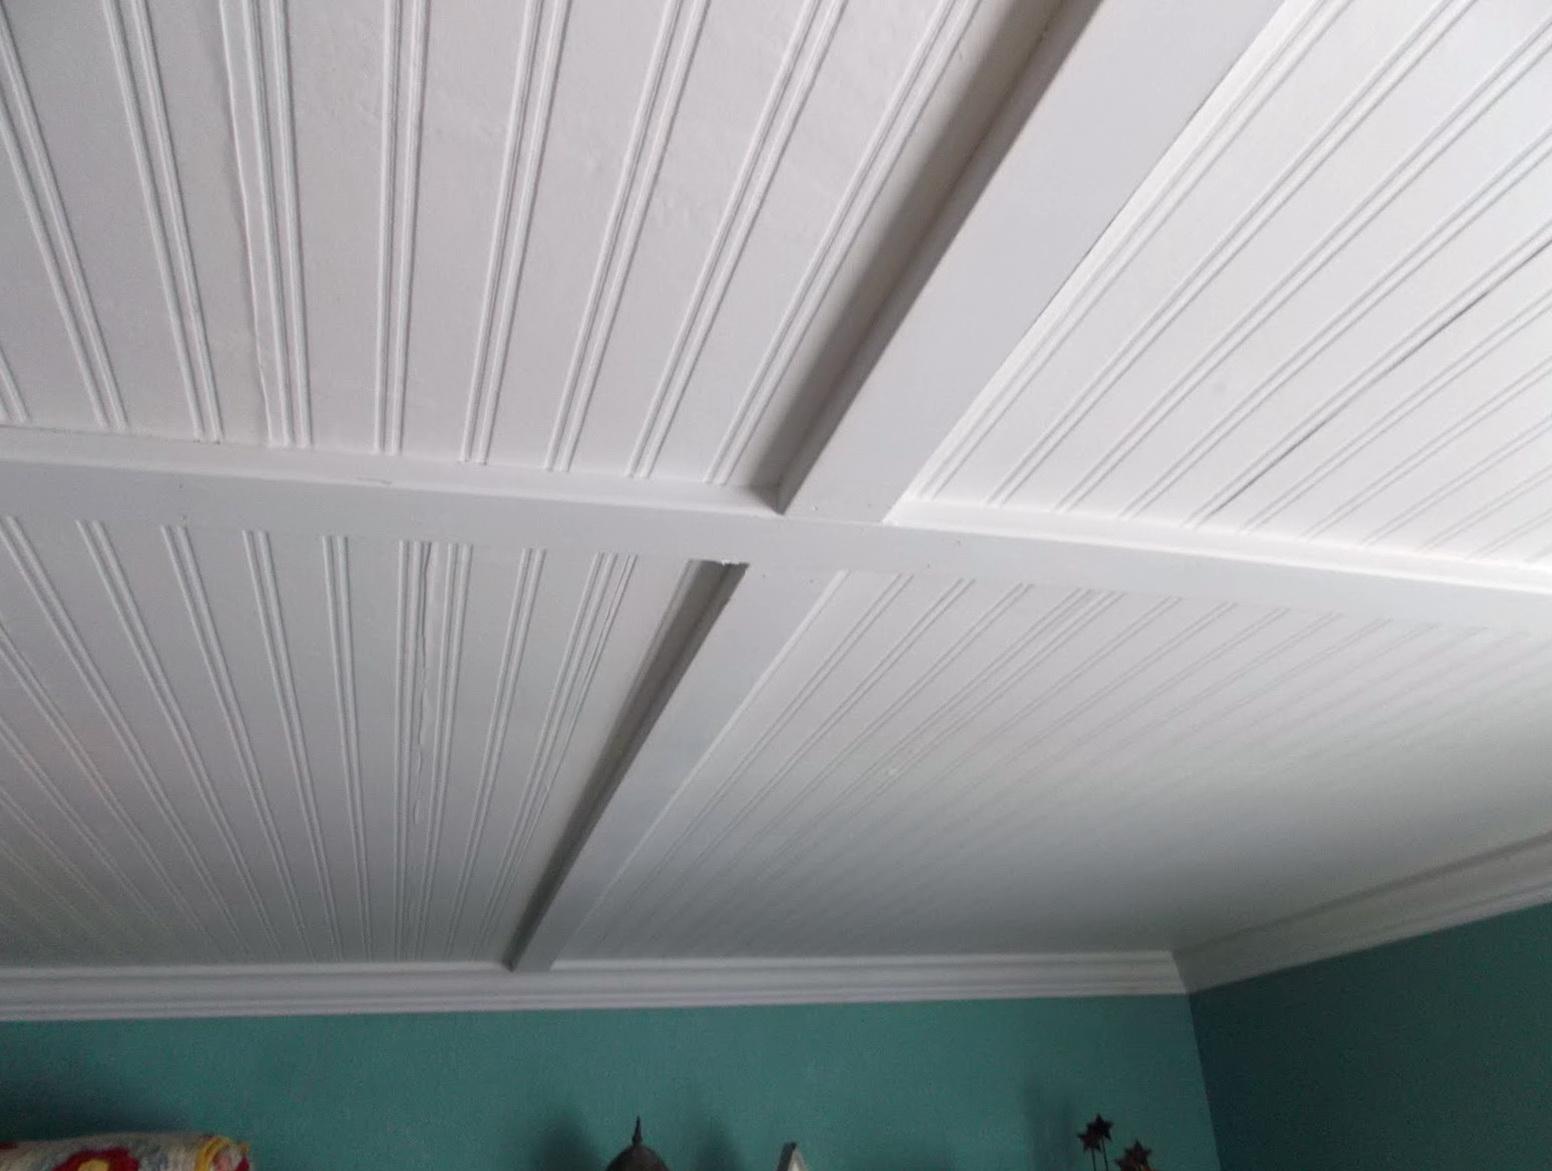 Covering Popcorn Ceiling Tiles